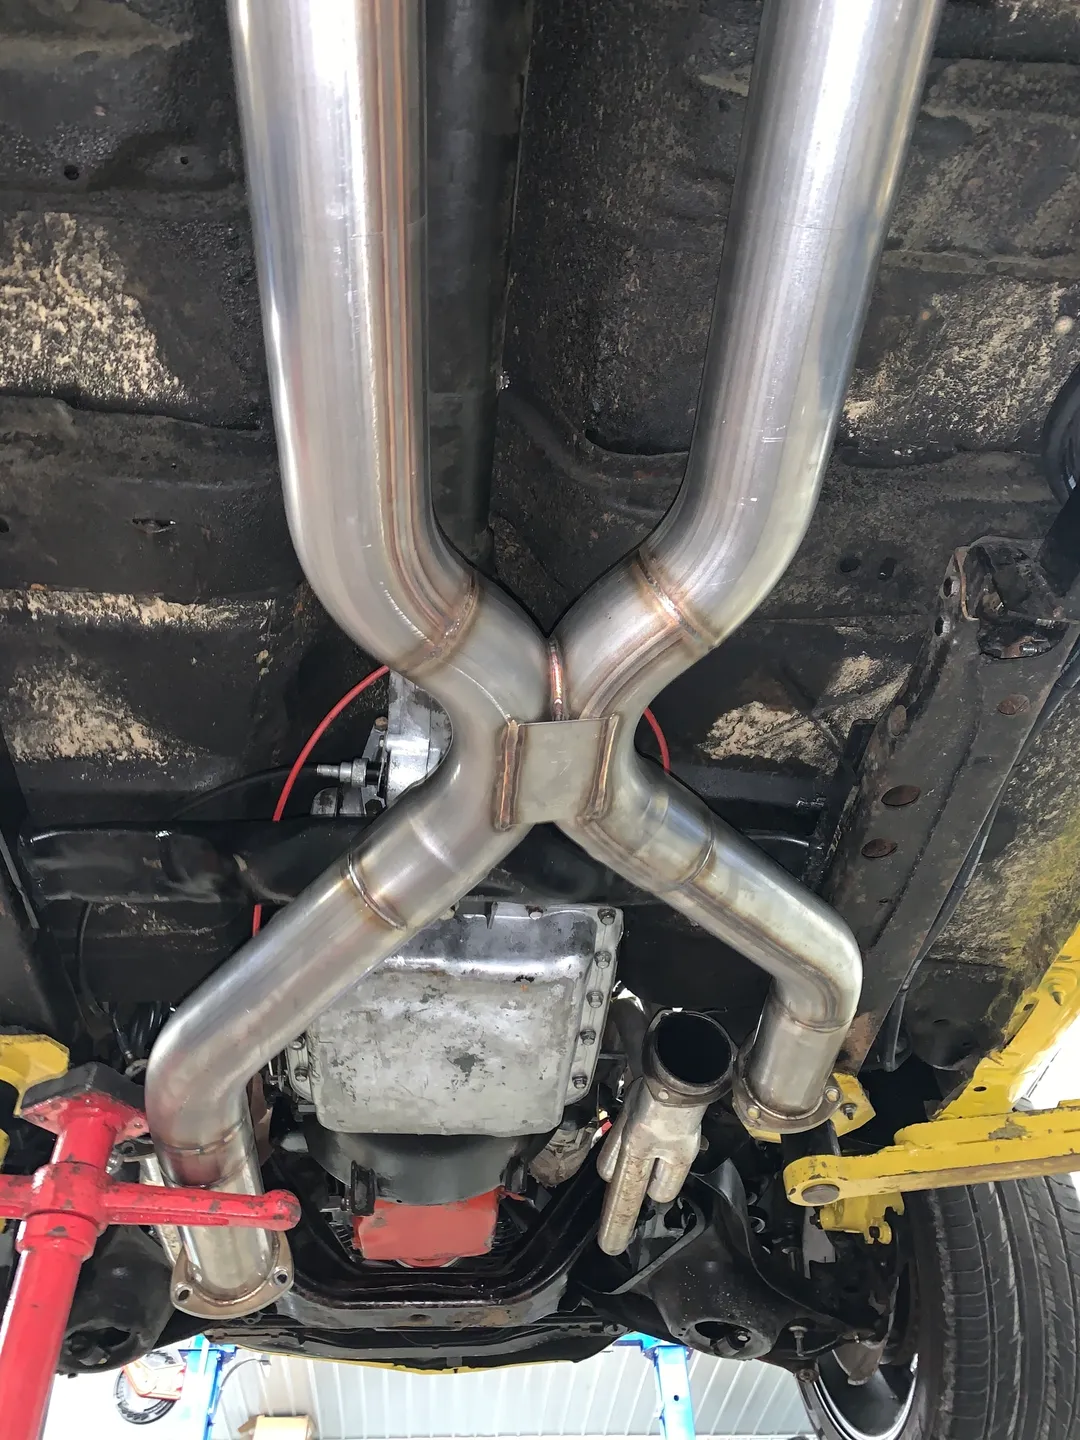 The lower side auto pipe parts of a car